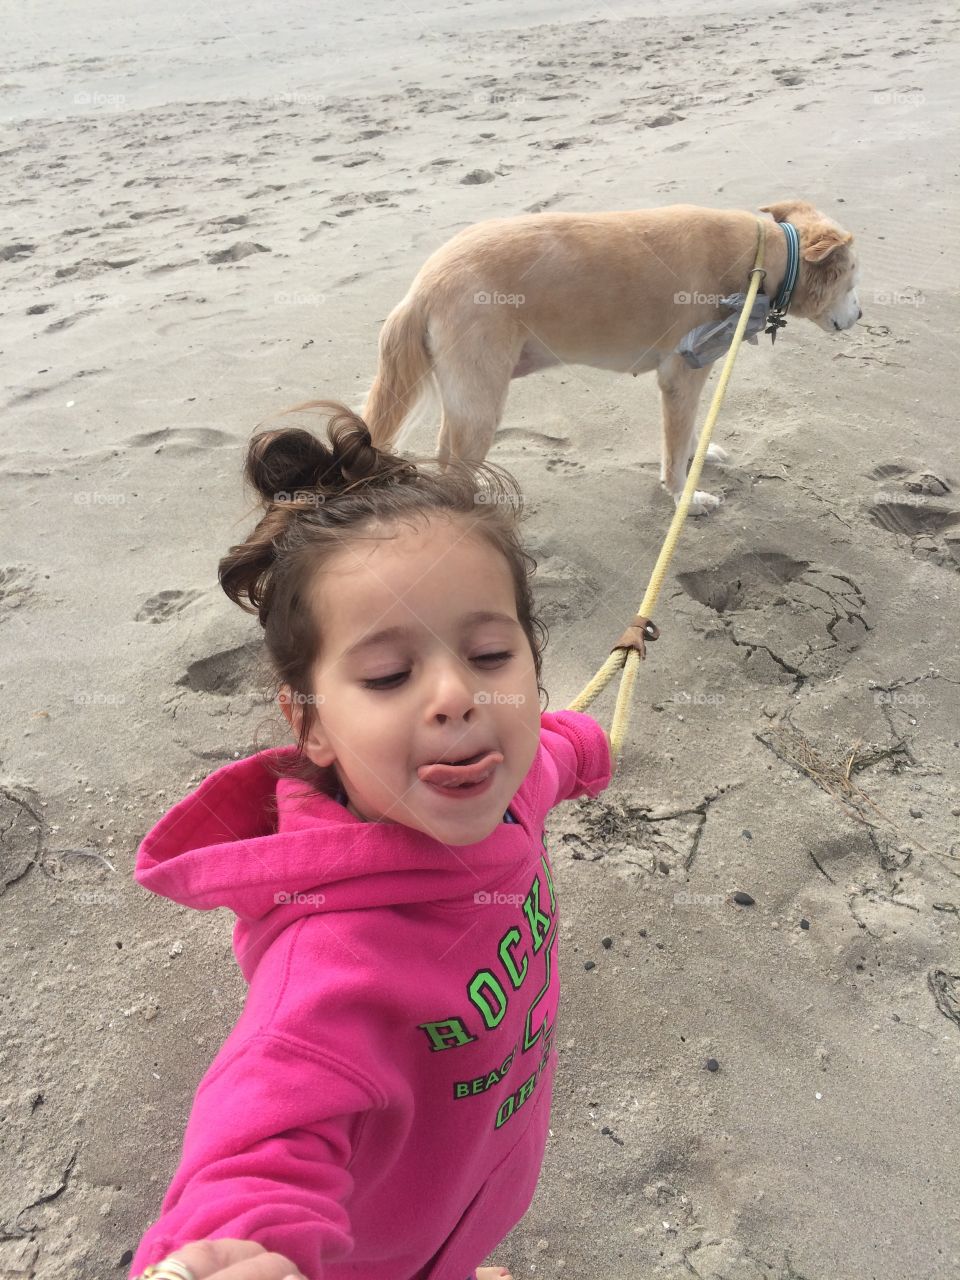 Grandkids and Old Dogs, Rockaway Beach, OR